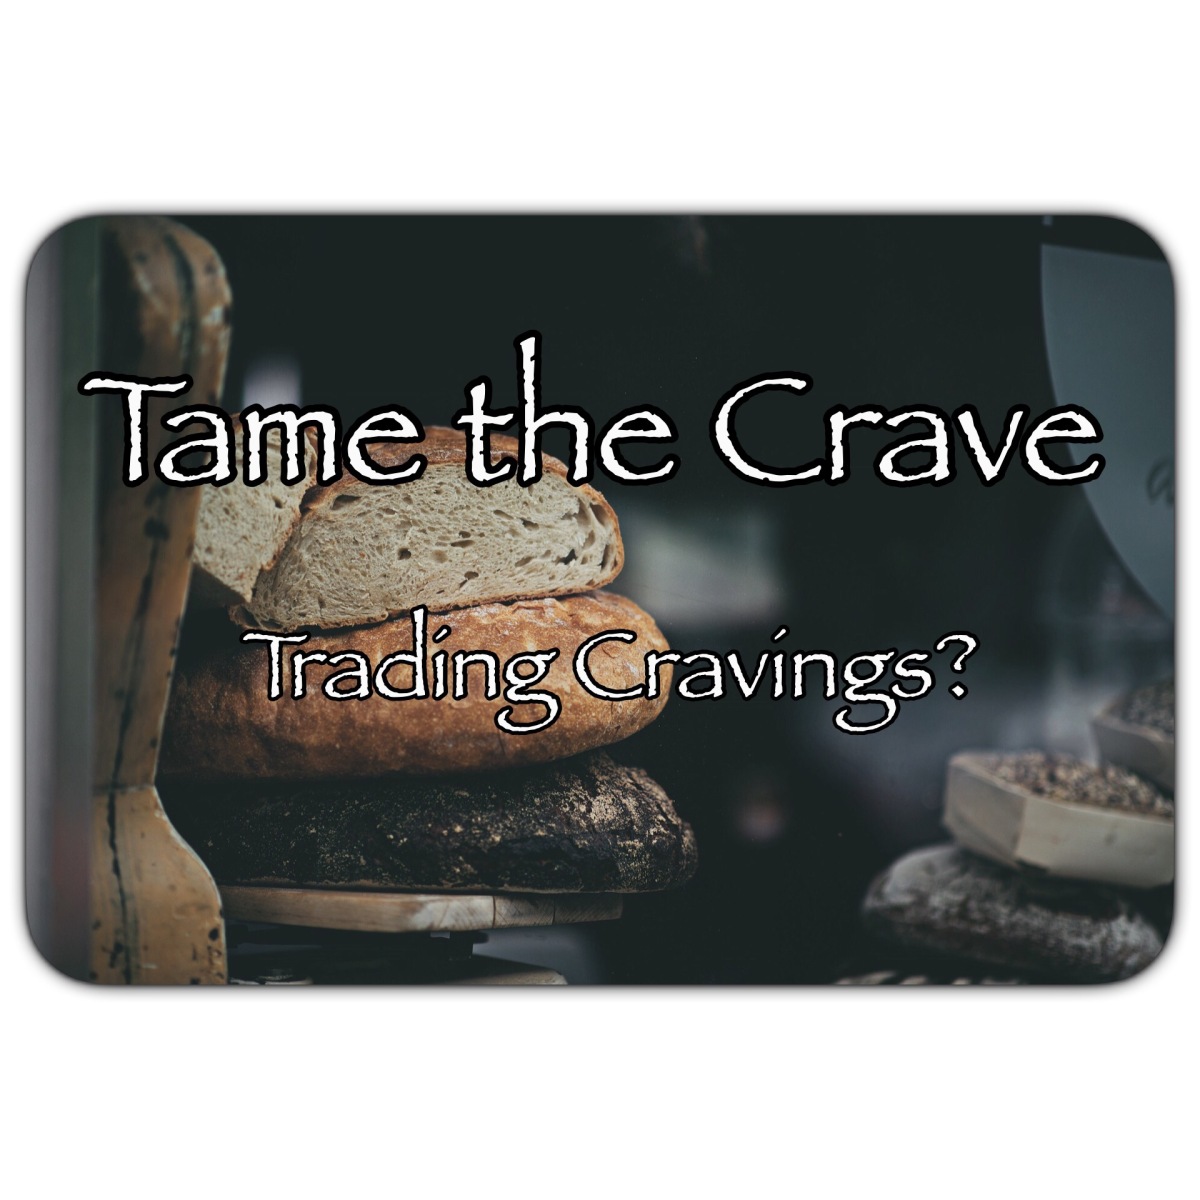 Tame the Crave – Trading Cravings?